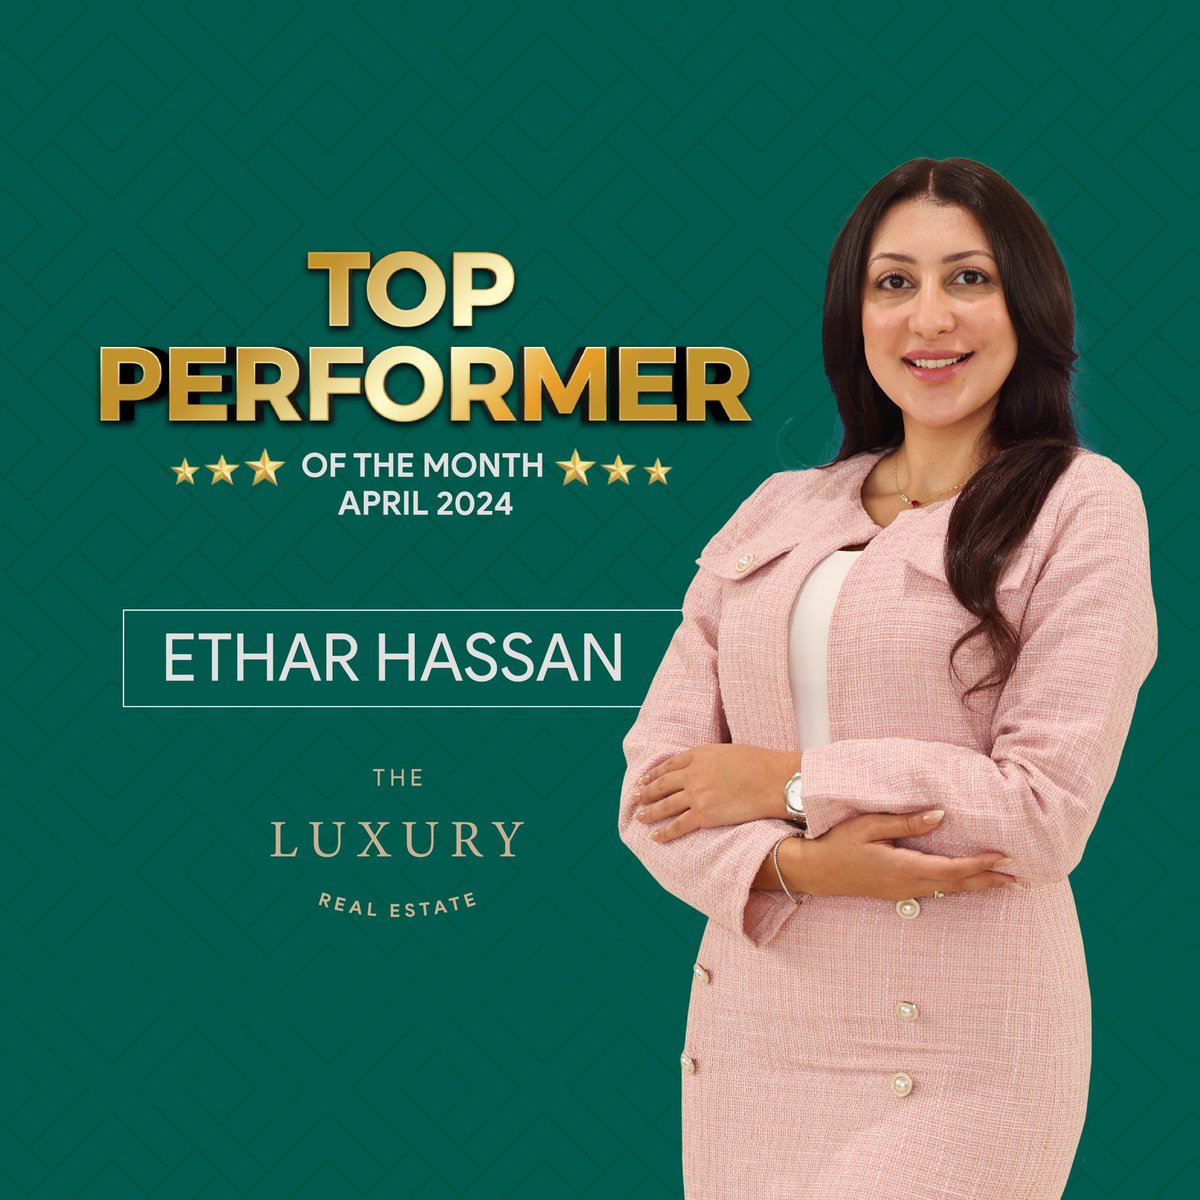 Congratulations Mr. Ethar Hassan for being one of the top performers for the month of April 2024! Your unwavering dedication and commitment to excellence have set a new standard for success. Keep it up!

#achievers #topperformers #topperformersofthemonth #realestateexperts